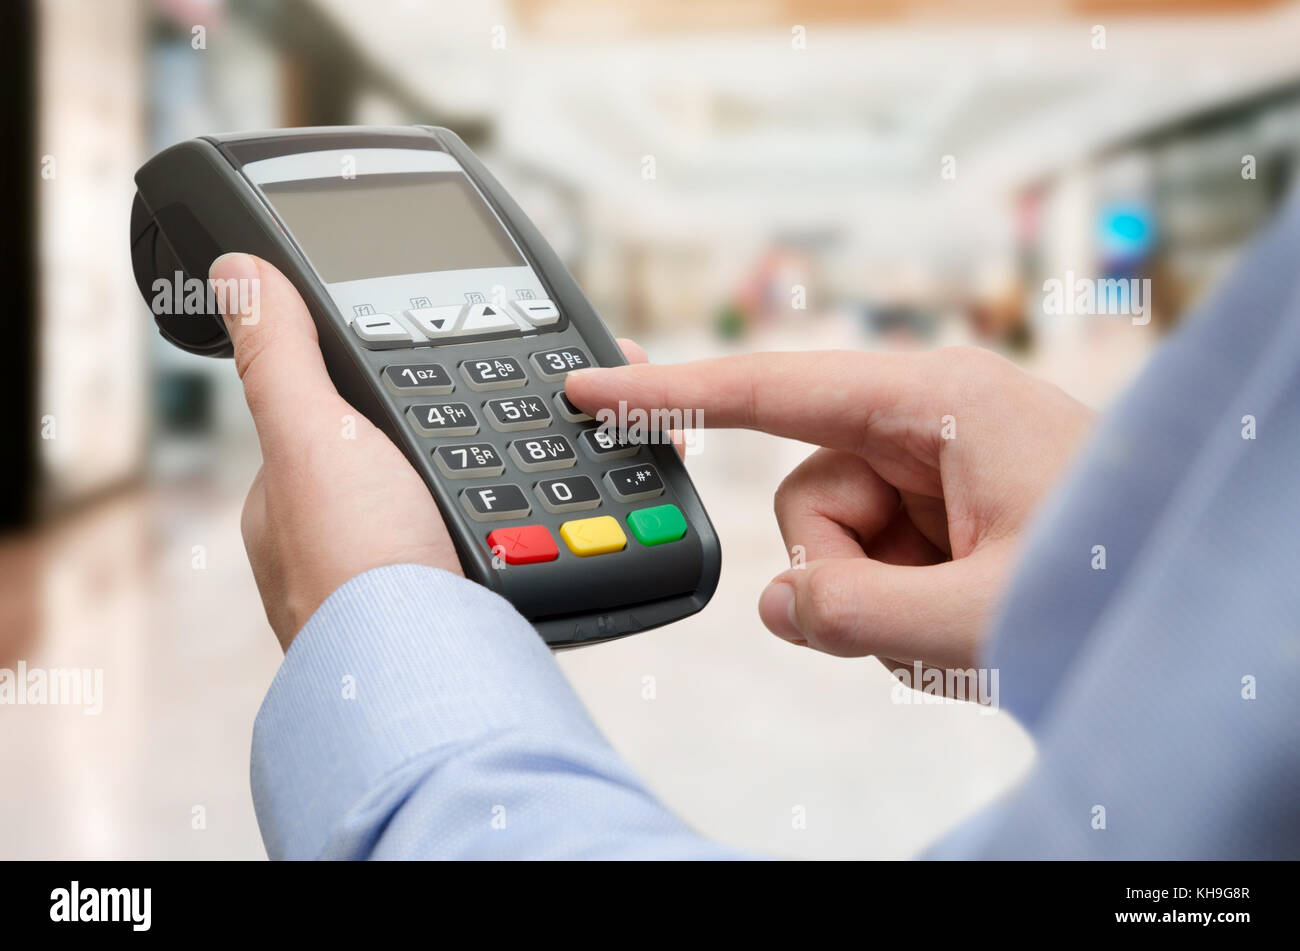 Hand using credit card payment machine. card machine terminal payment credit shop reader pay concept Stock Photo